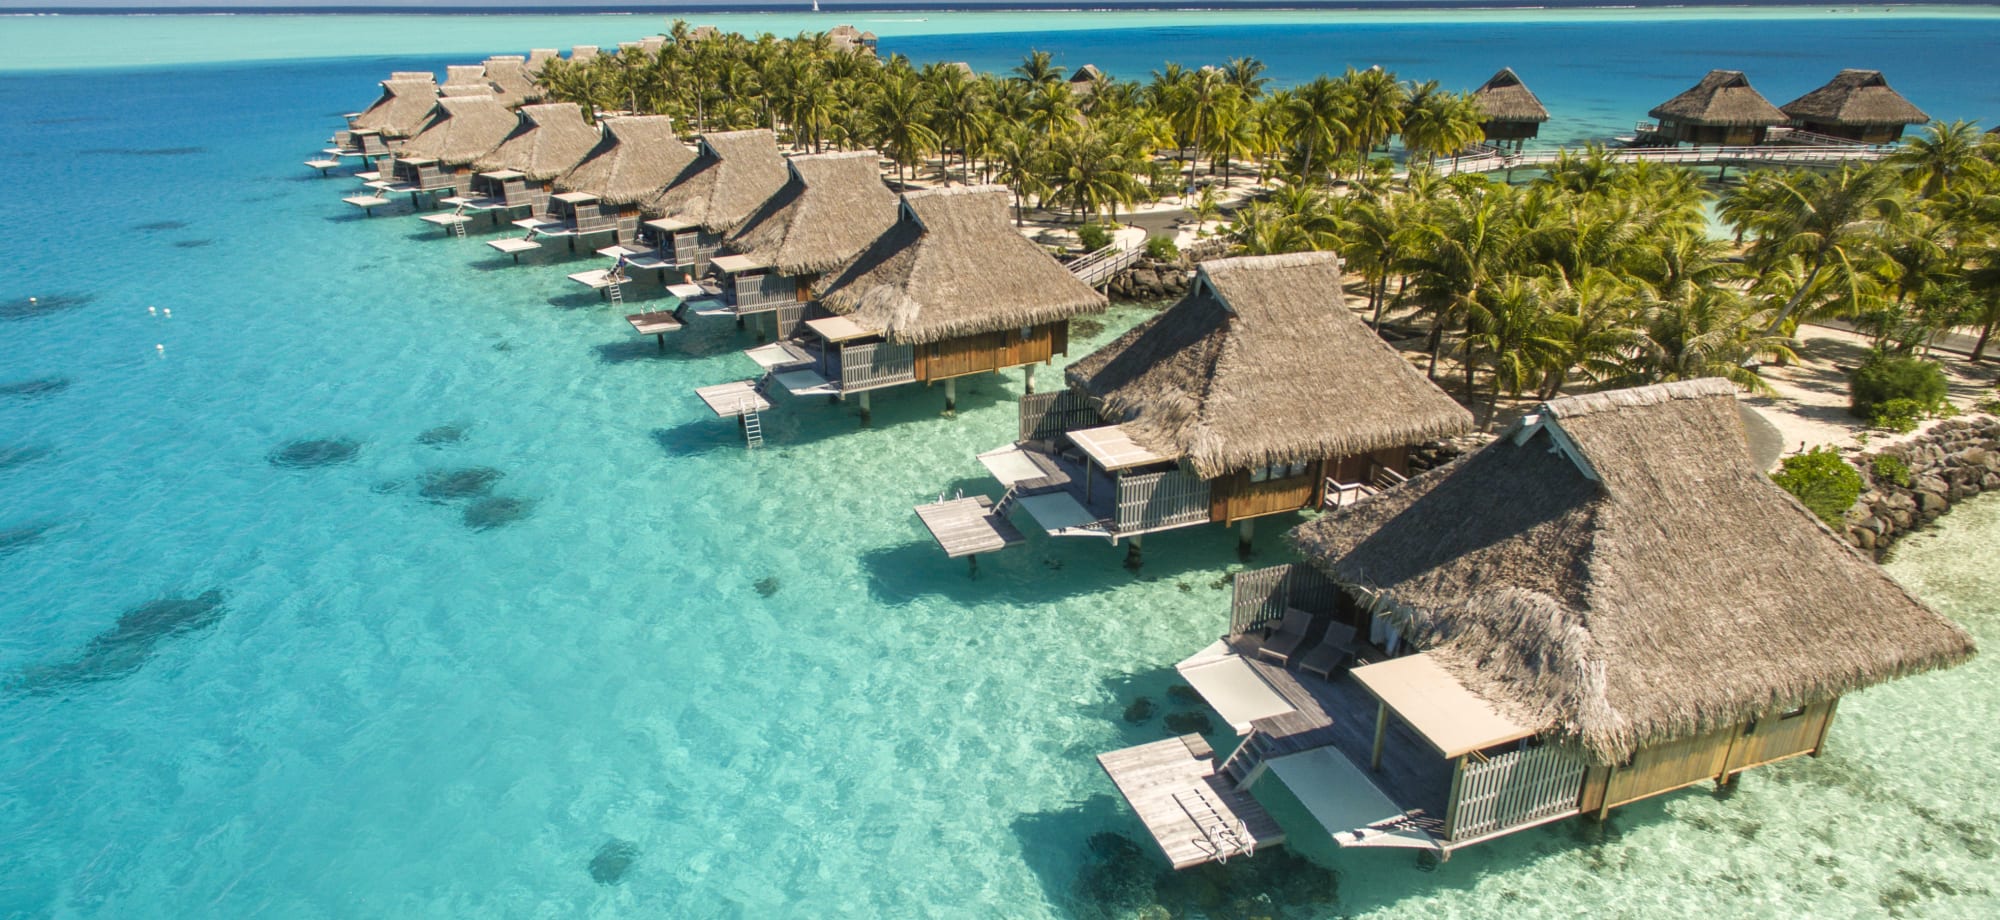 Overwater villas front a white sand and overlooking a private island. 